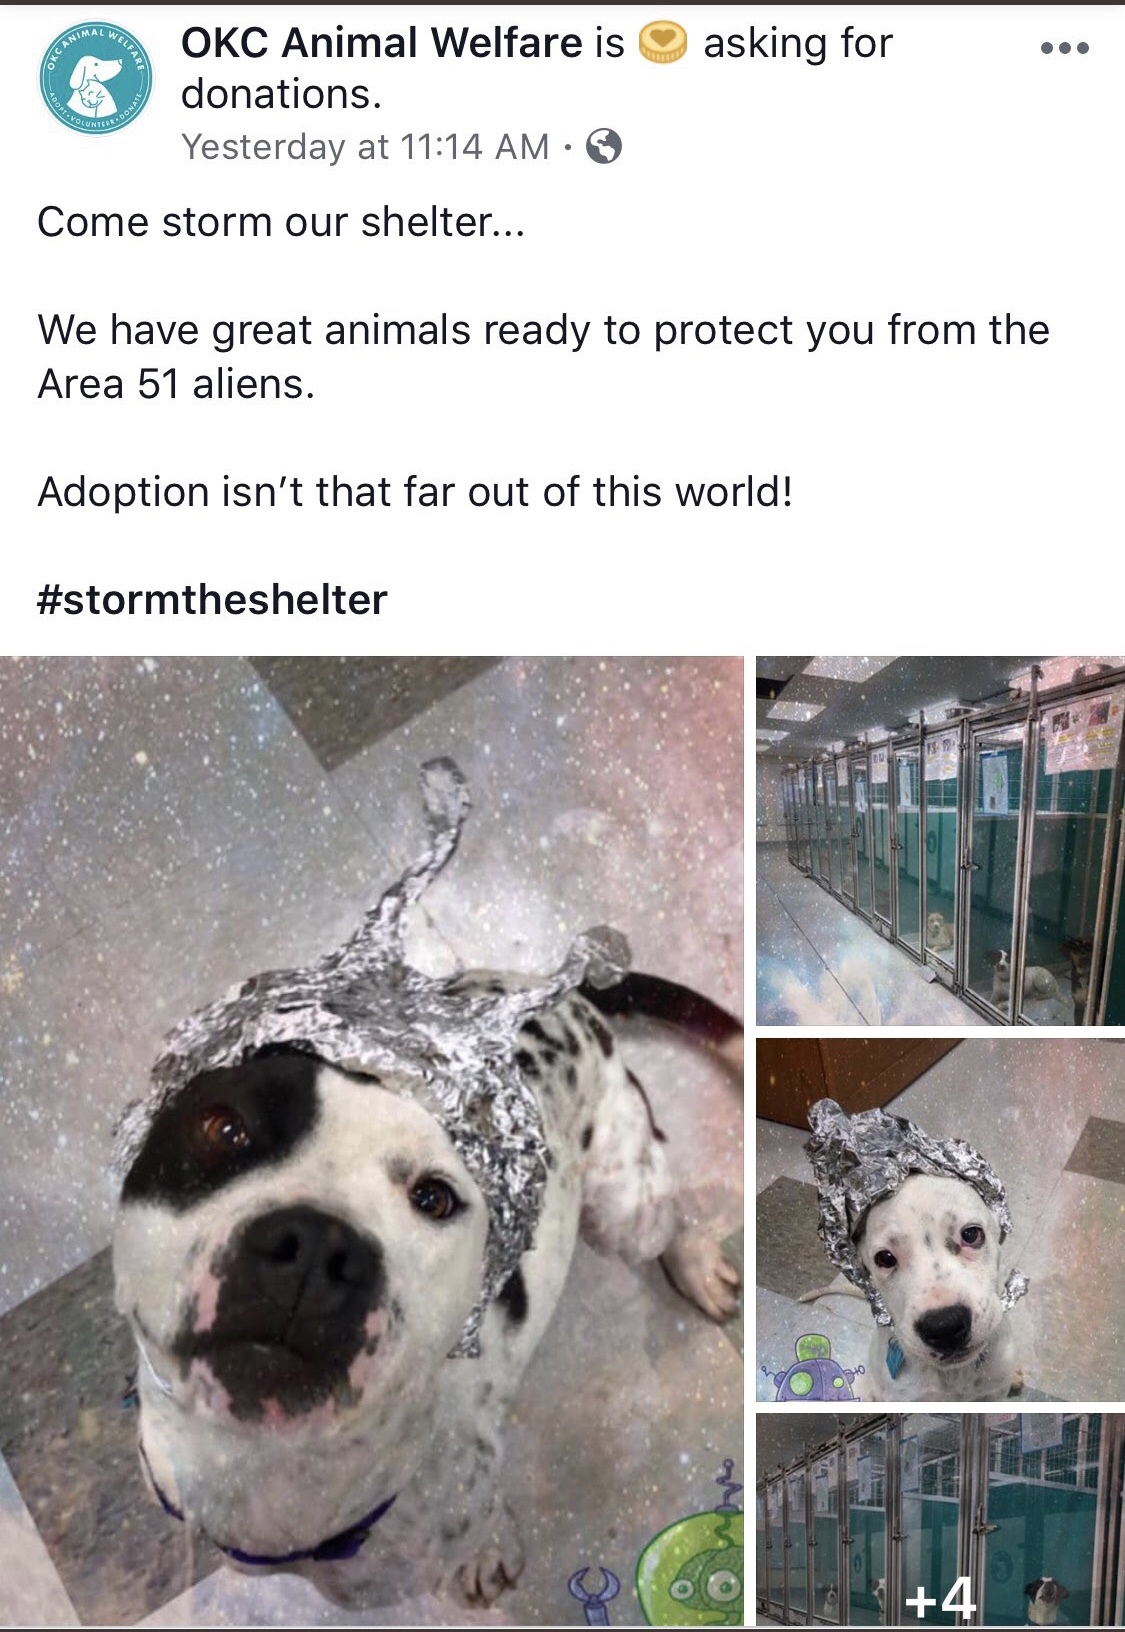 snout - asking for Okc Animal Welfare is donations. Yesterday at Come storm our shelter... We have great animals ready to protect you from the Area 51 aliens. Adoption isn't that far out of this world!